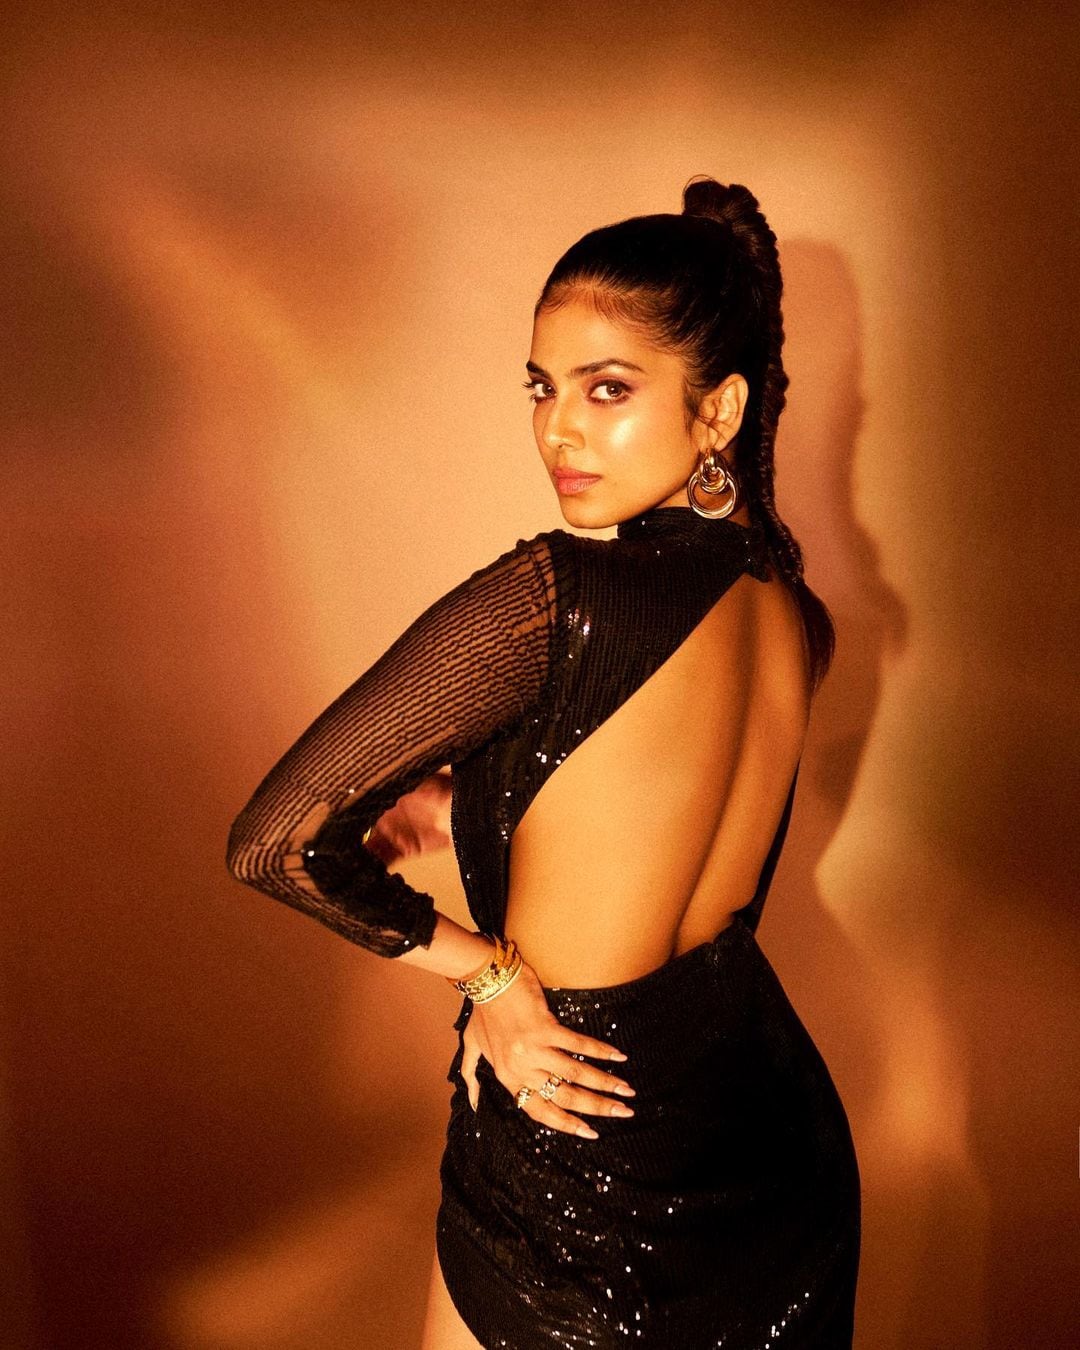 Malavika Mohanan is flaunting her curves in a sexy black backless dress.